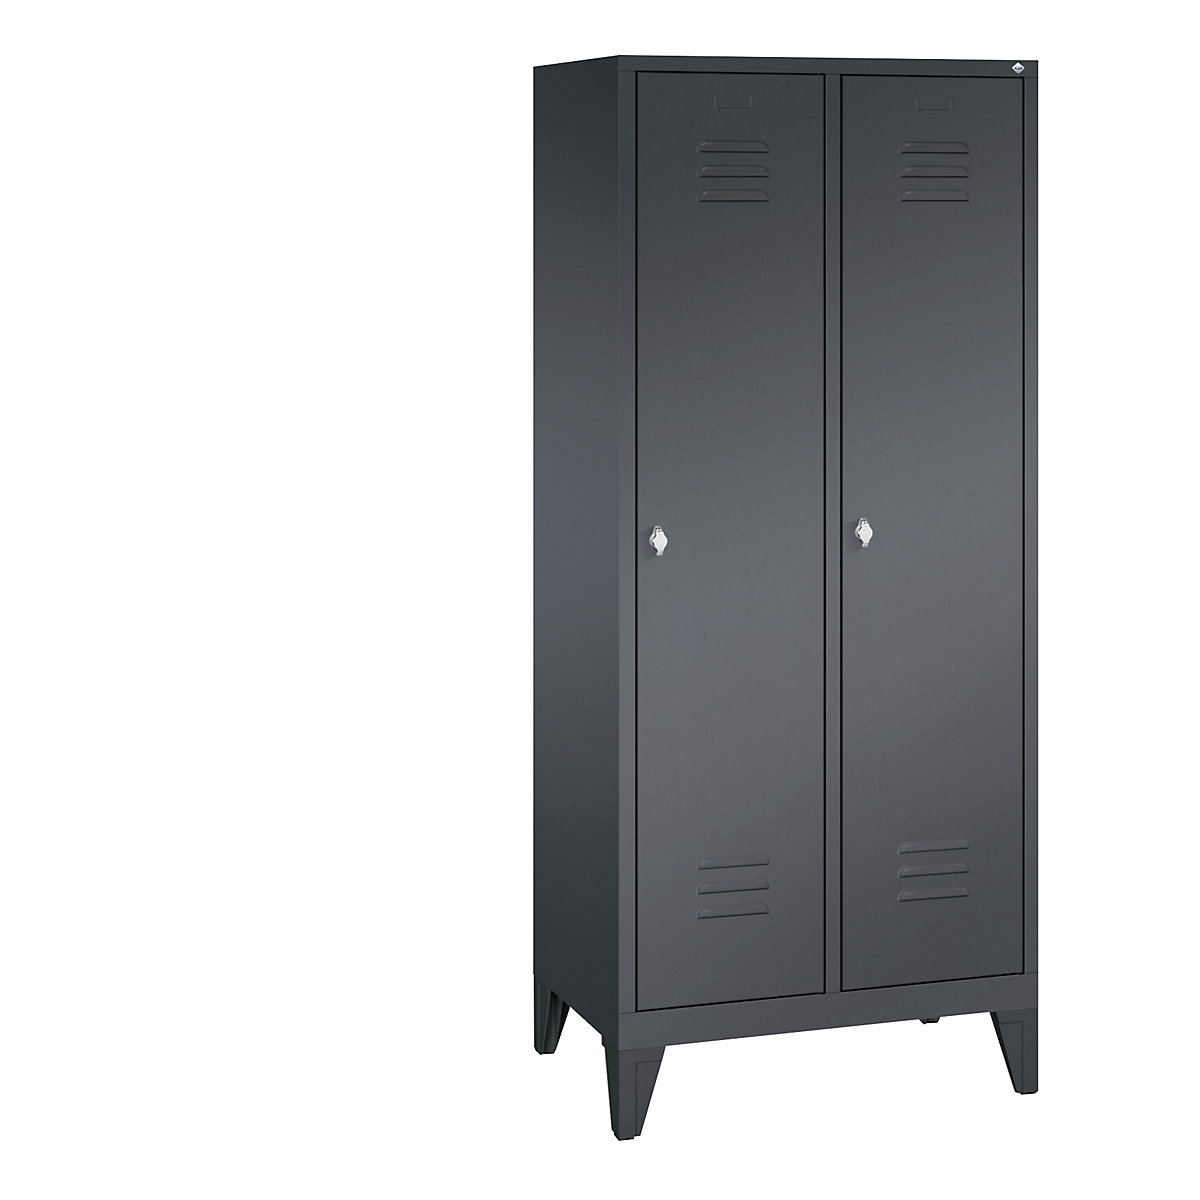 CLASSIC cloakroom locker with feet – C+P, 2 compartments, compartment width 400 mm, black grey-7